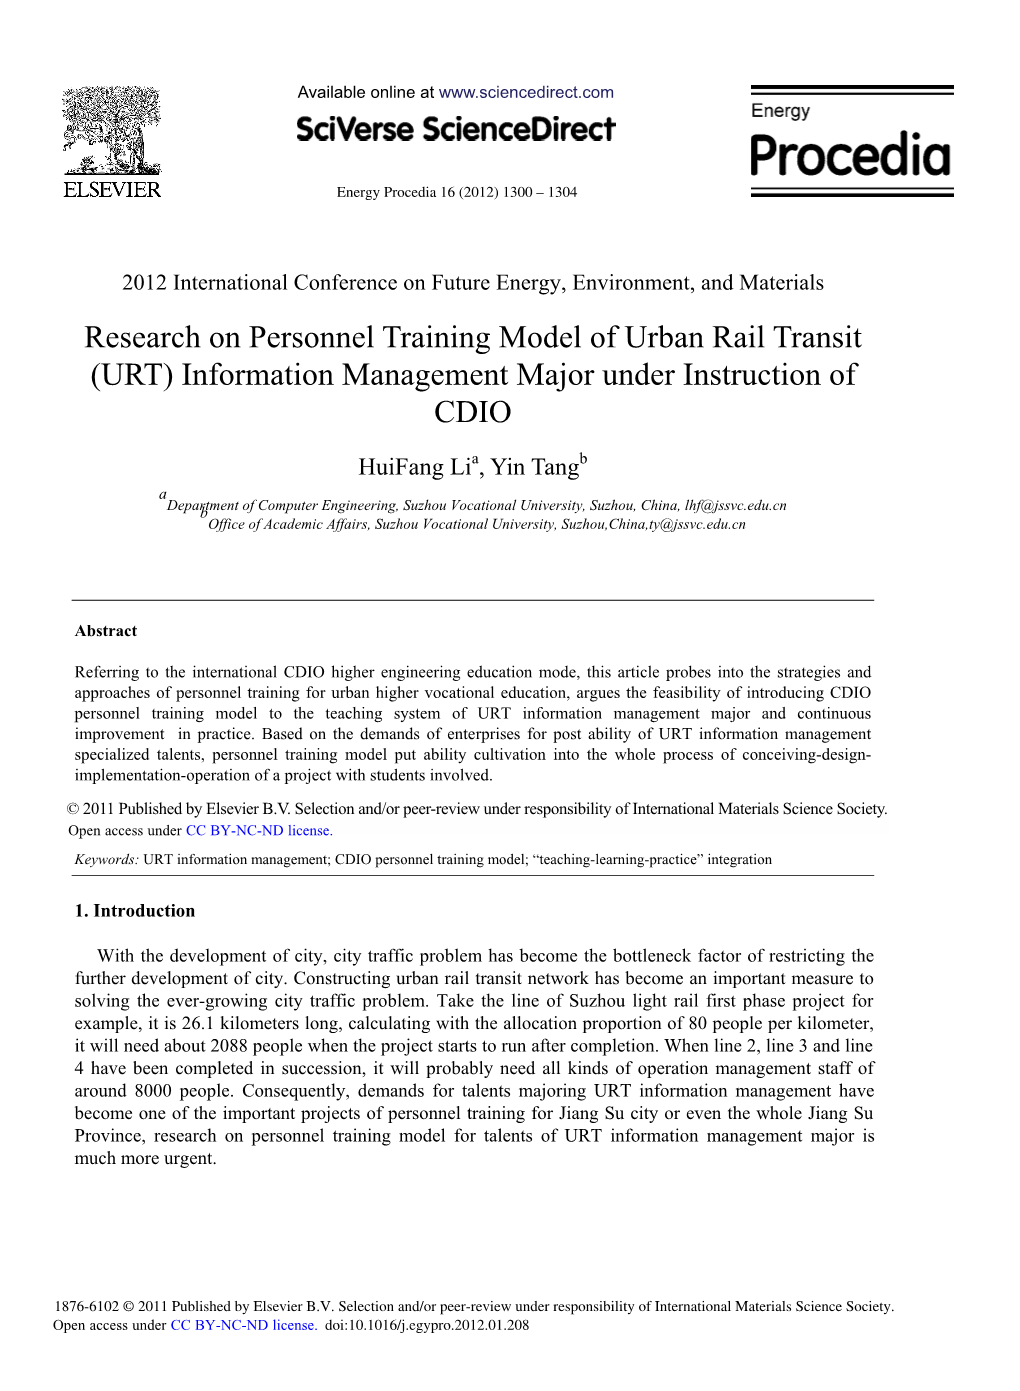 Research on Personnel Training Model of Urban Rail Transit (URT) Information Management Major Under Instruction of CDIO